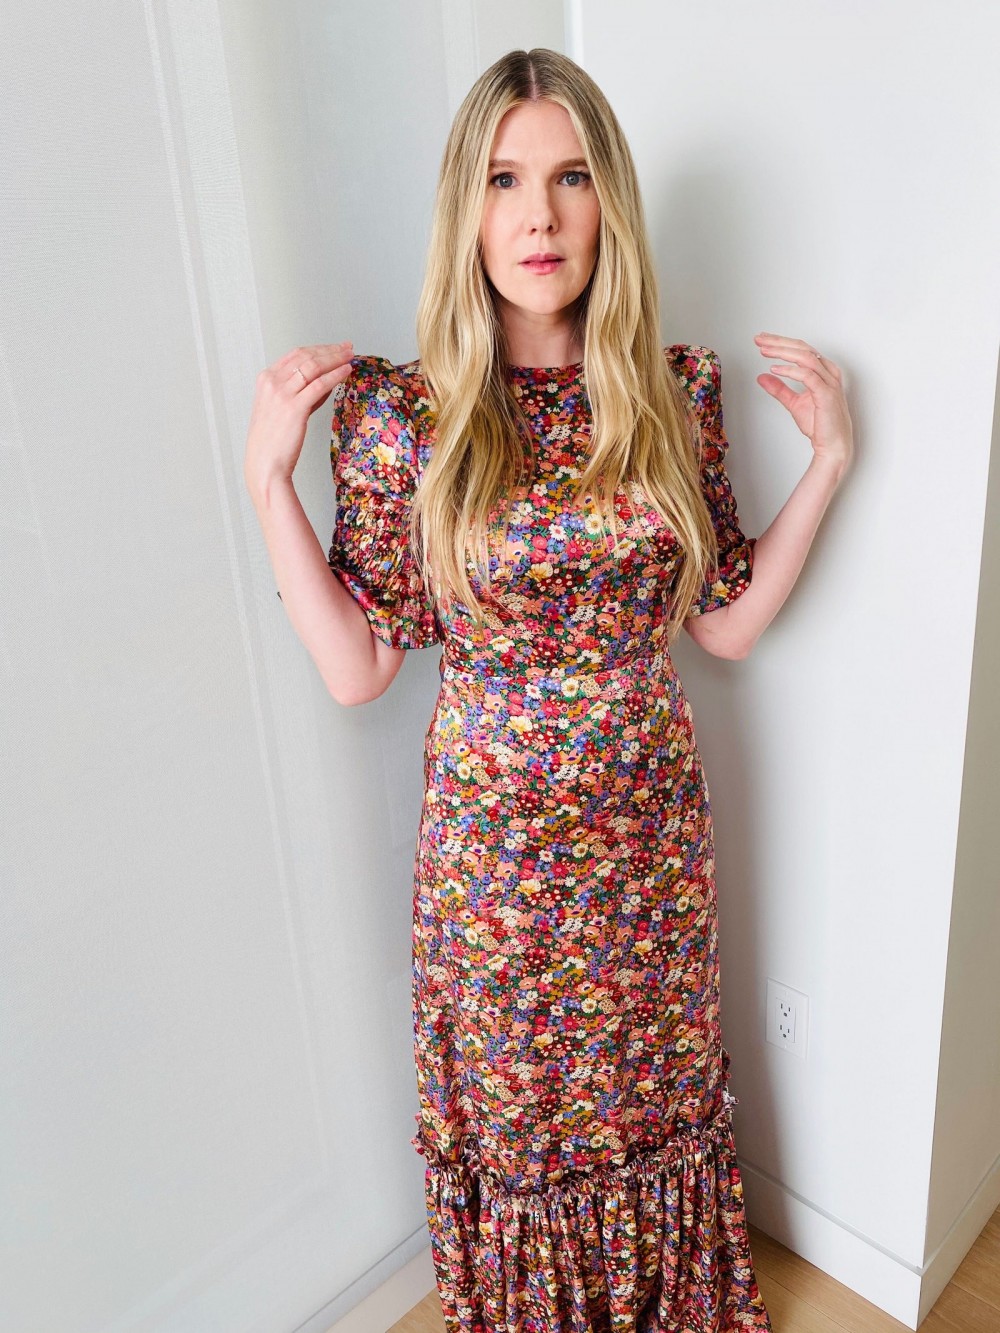 Lily Rabe in a The Vampire's Wife dress and Anita Ko jewelry